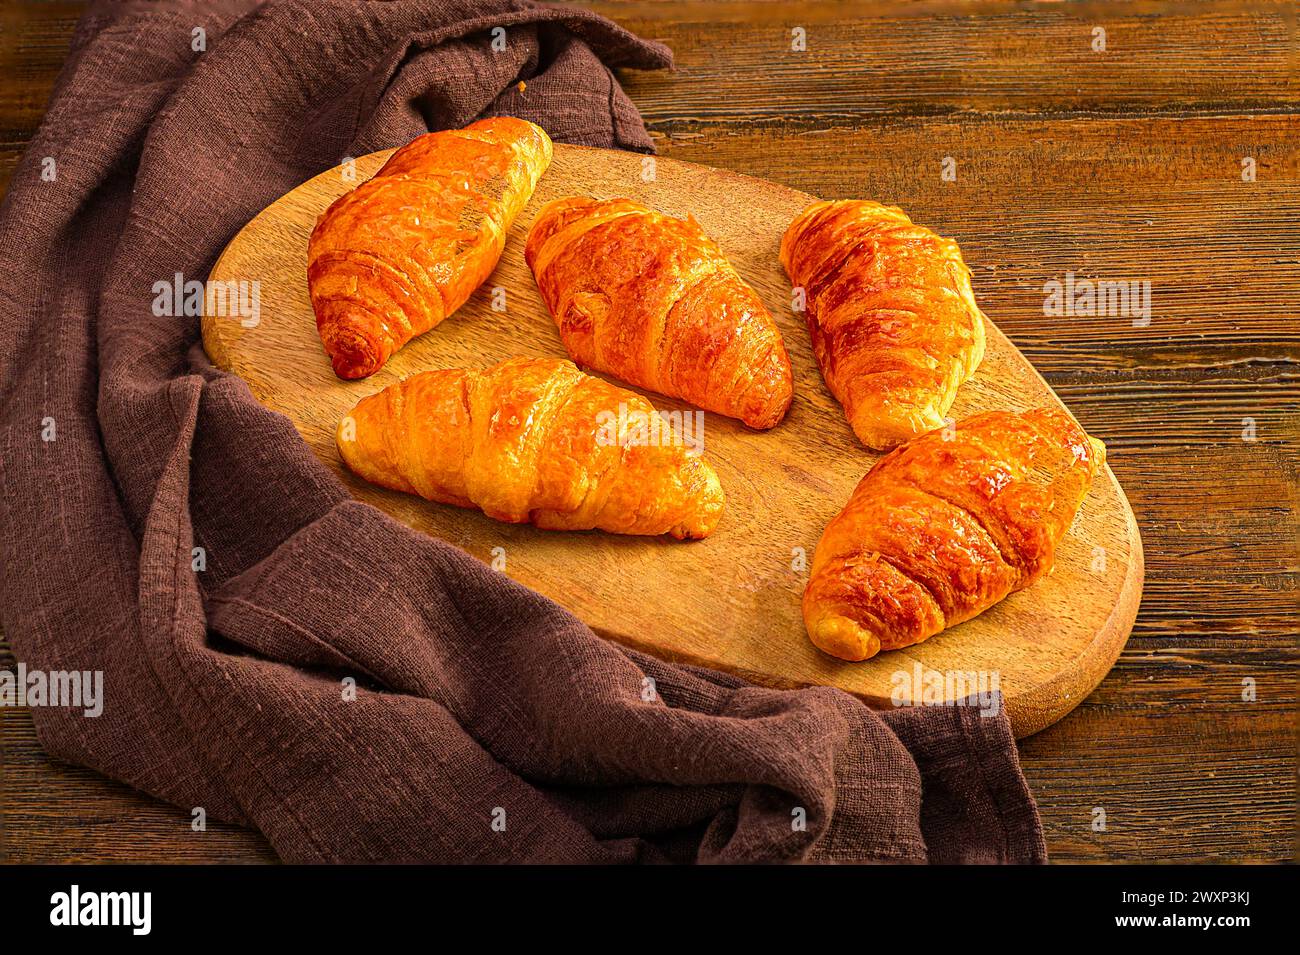 Delicious Croissants on Wooden Board Stock Photo